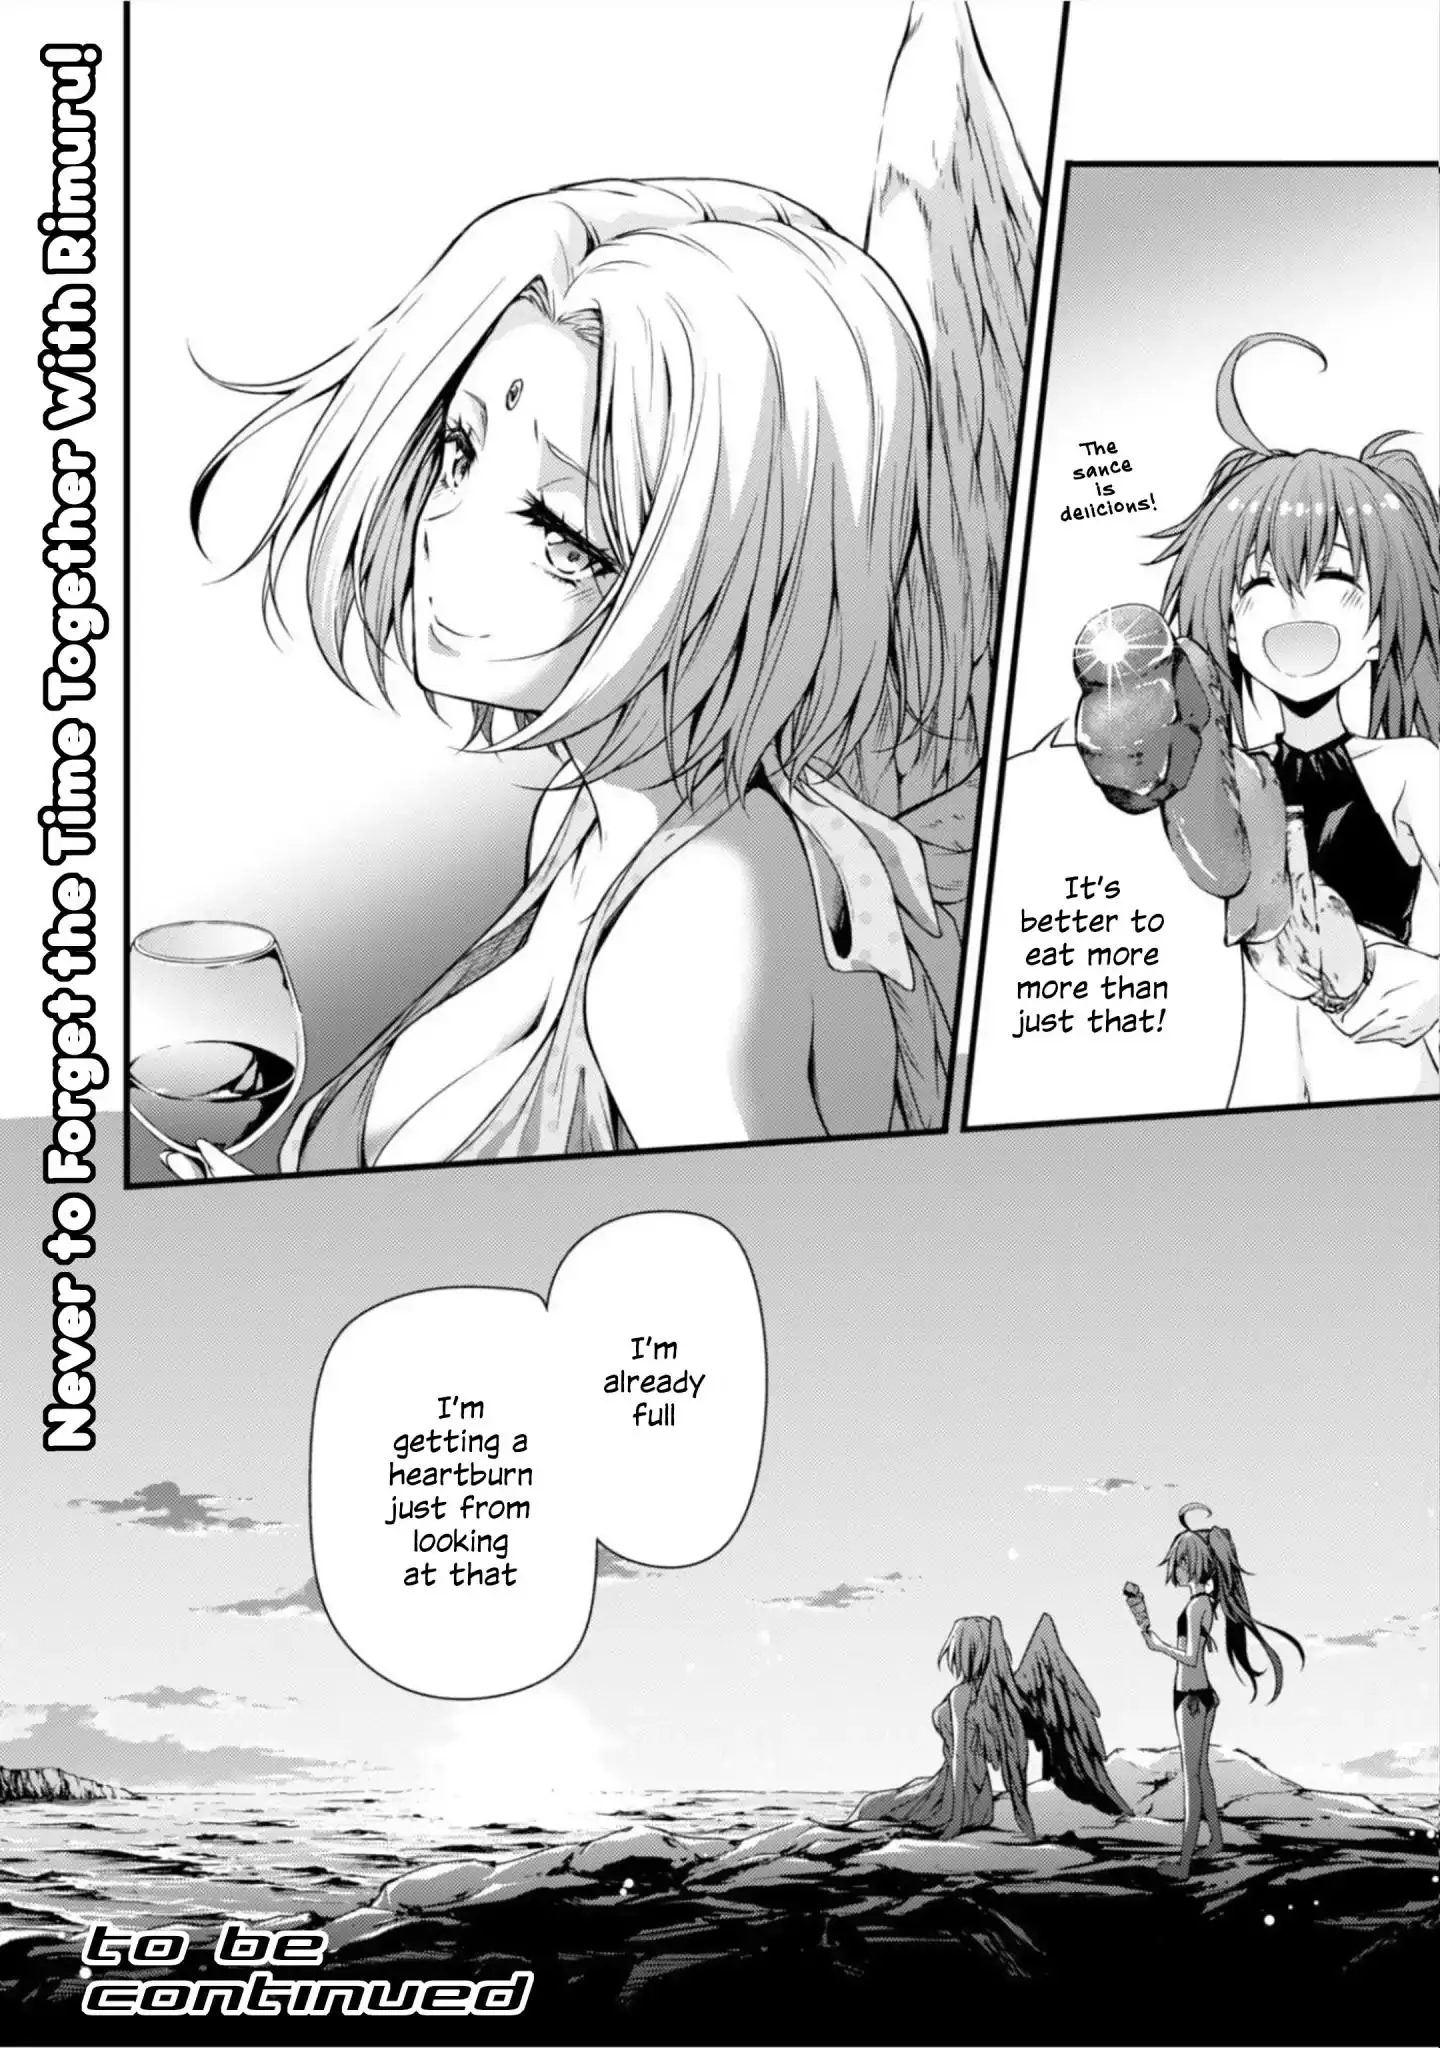 Tensei Shitara Slime Datta Ken: The Ways of Strolling in the Demon Country - 23 page 25